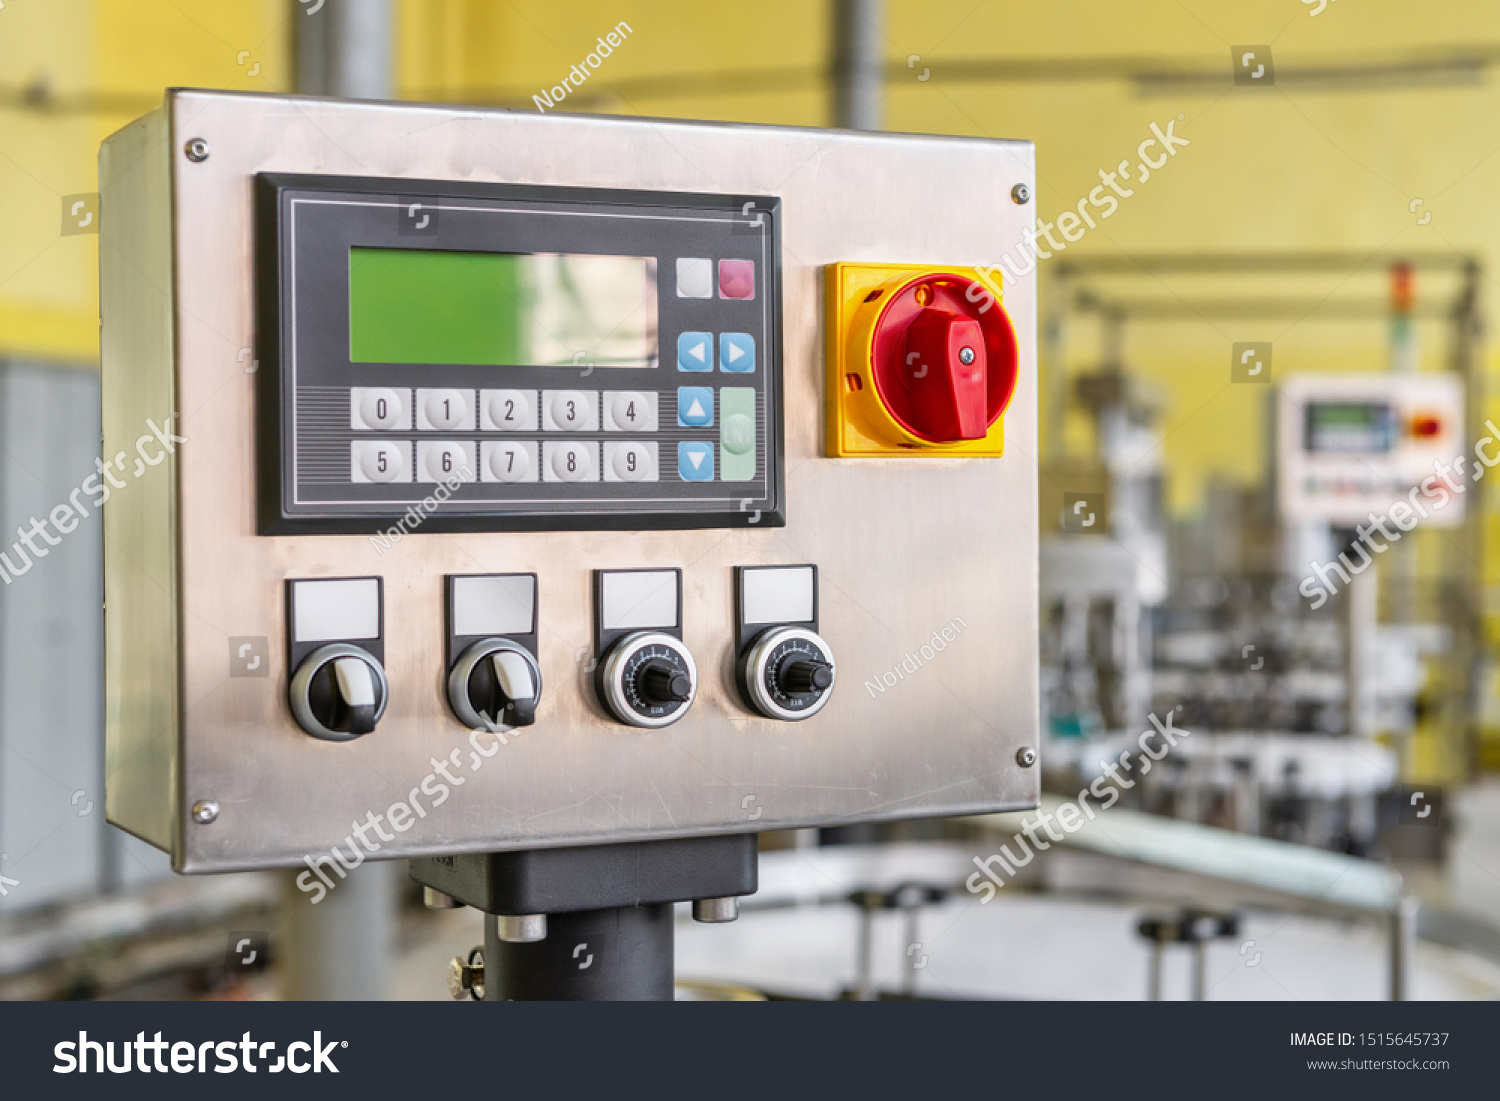 Conveyor control panel. The system of control and management of various equipment. The panel contains buttons, switches and LCD display. #1515645737